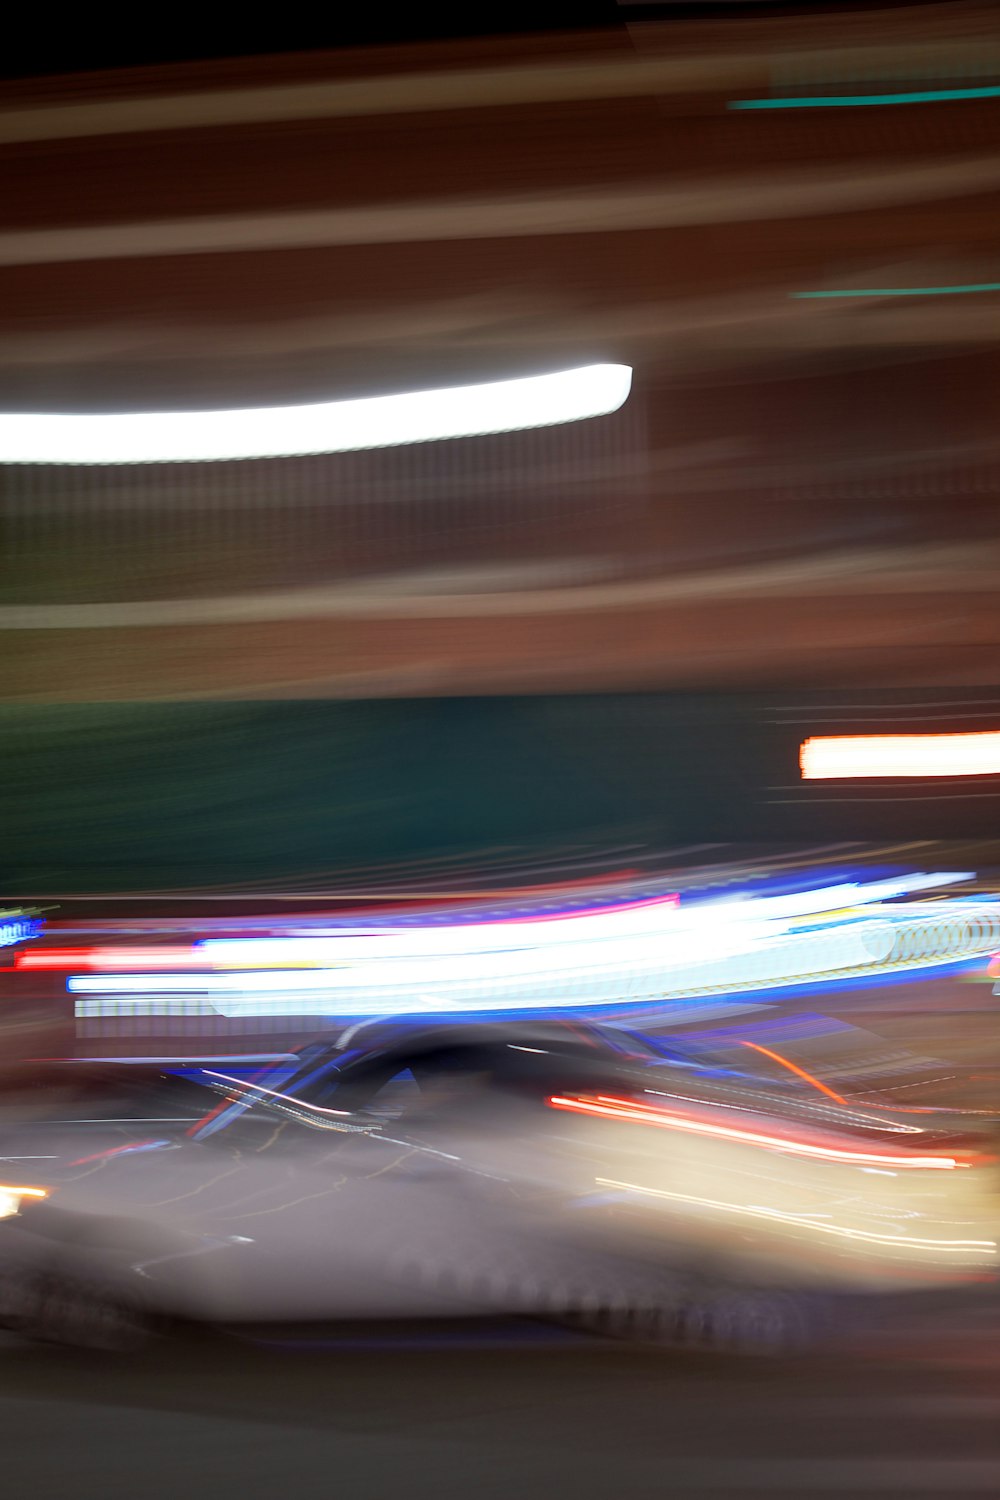 blurry image of a car